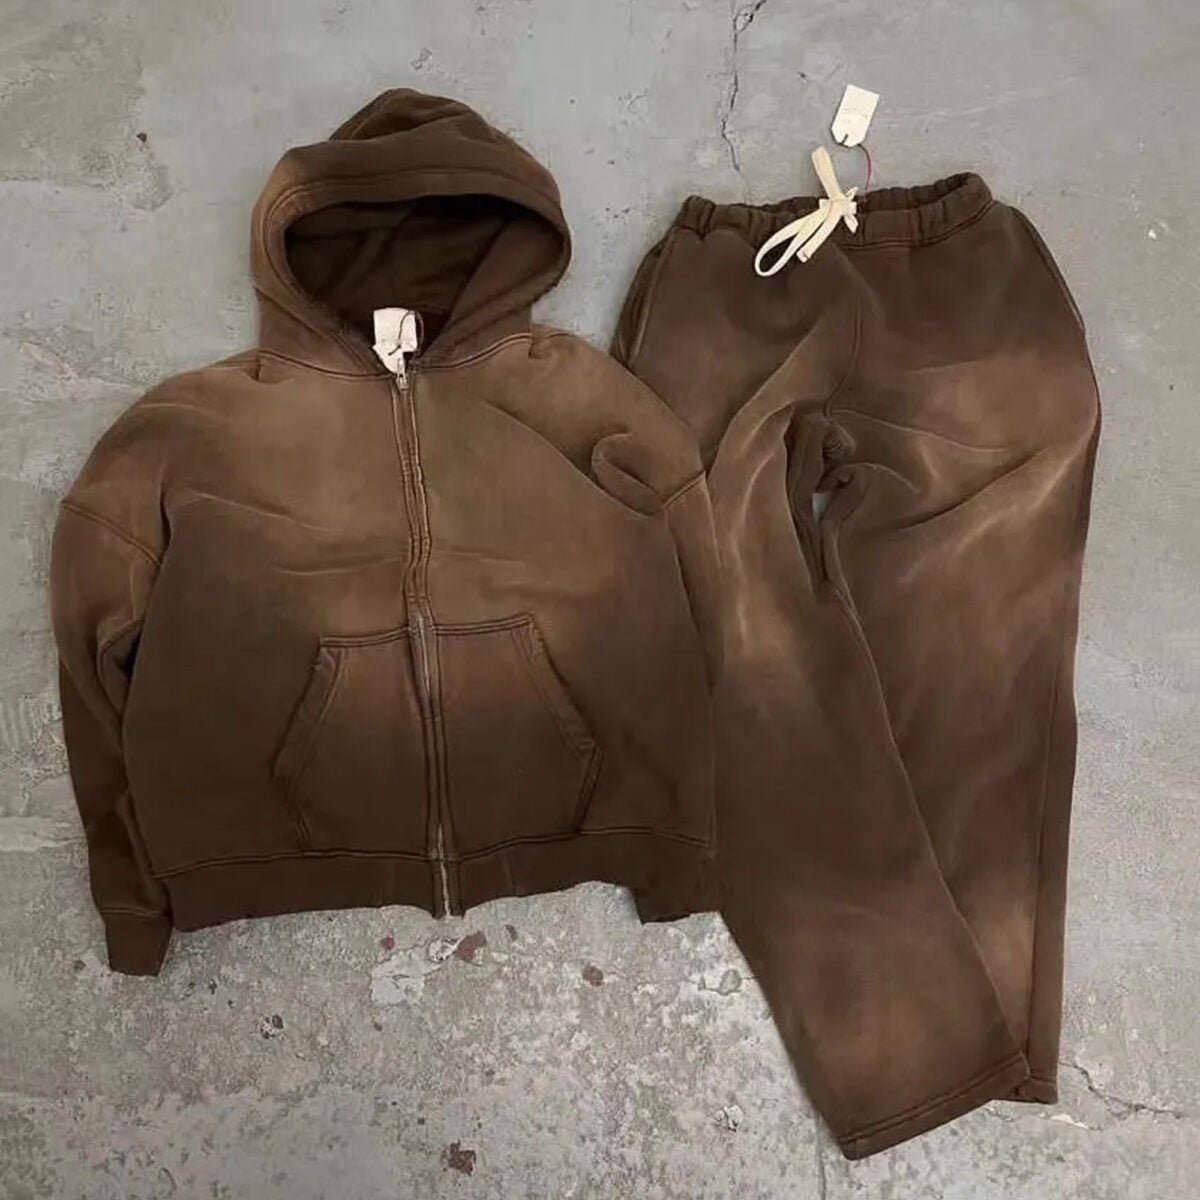 Warmth plain washed tracksuits